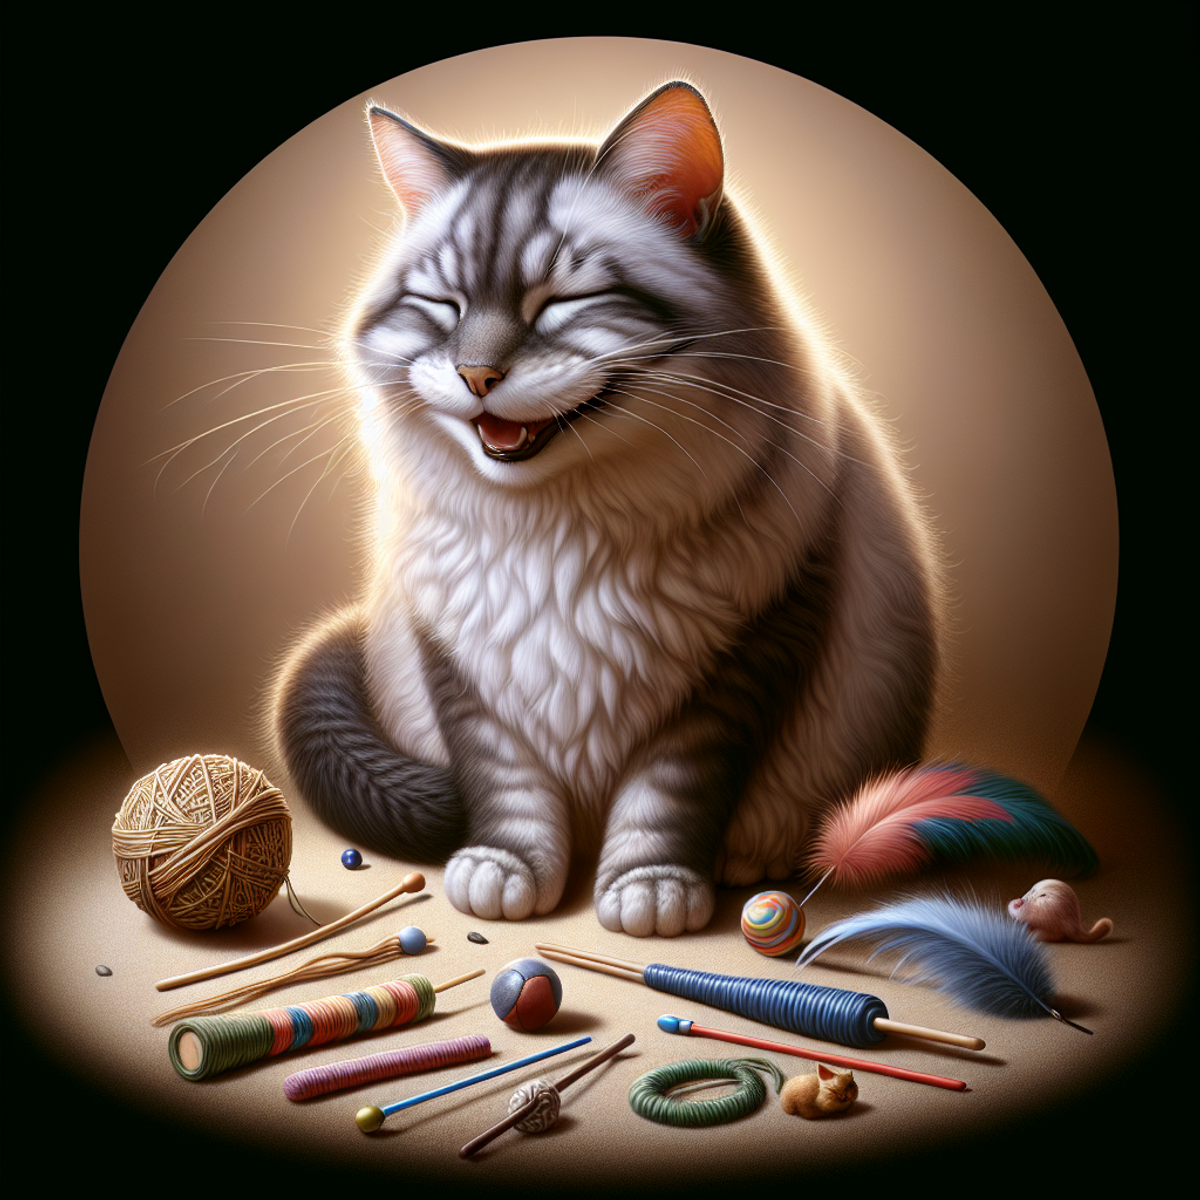 An elderly gray and white cat with a content expression plays with a feather wand, string, and crinkly ball in a cozy home environment.